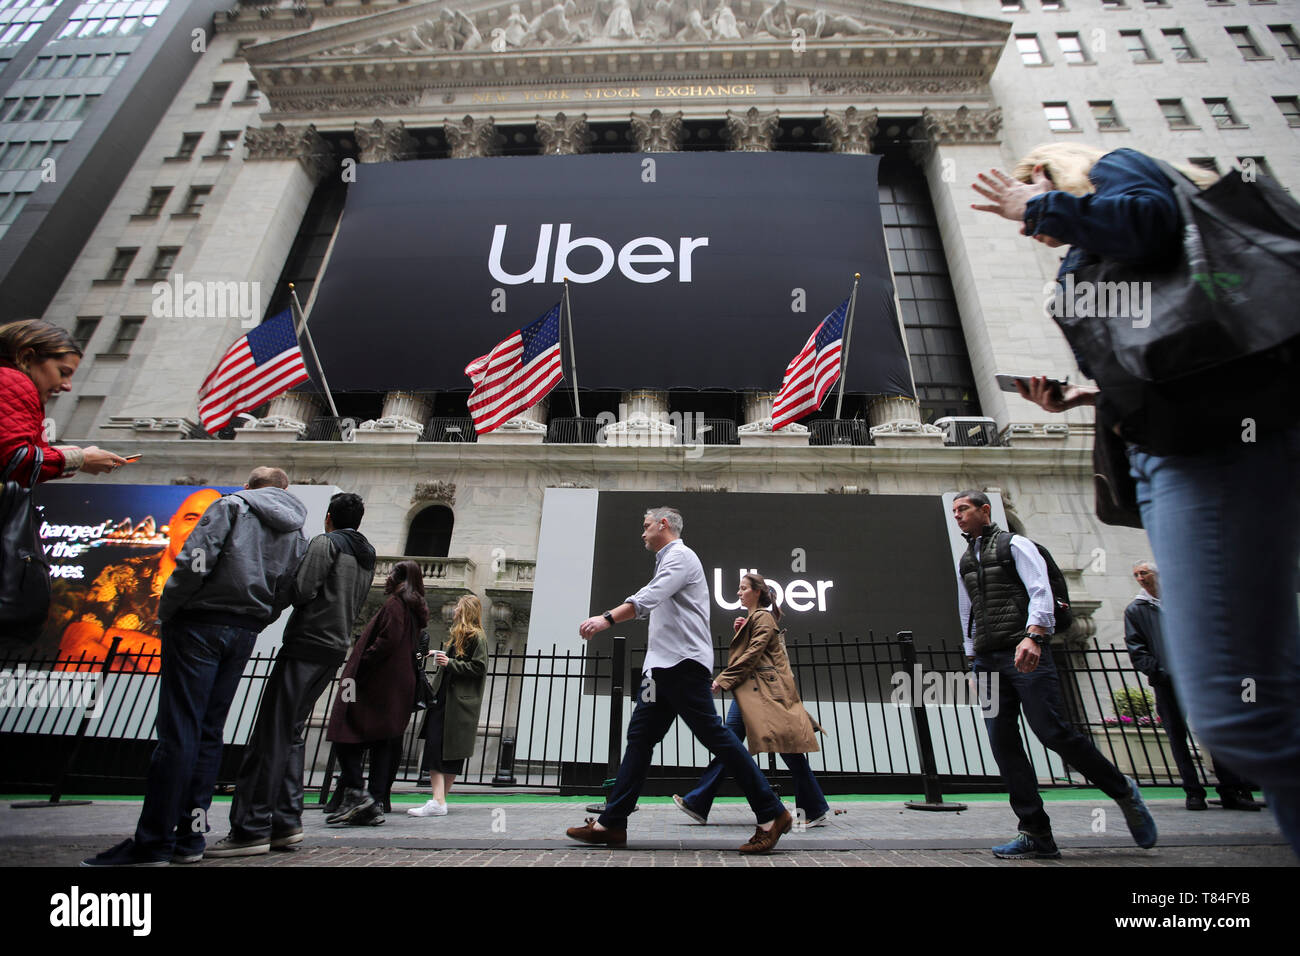 New York, USA. 10th May, 2019. Banners of Uber Technologies Inc. are seen hanging outside the New York Stock Exchange in New York, the United States, May 10, 2019. U.S. ride hailing company Uber Technologies Inc. began trading on the NYSE on Friday. Credit: Wang Ying/Xinhua/Alamy Live News Stock Photo